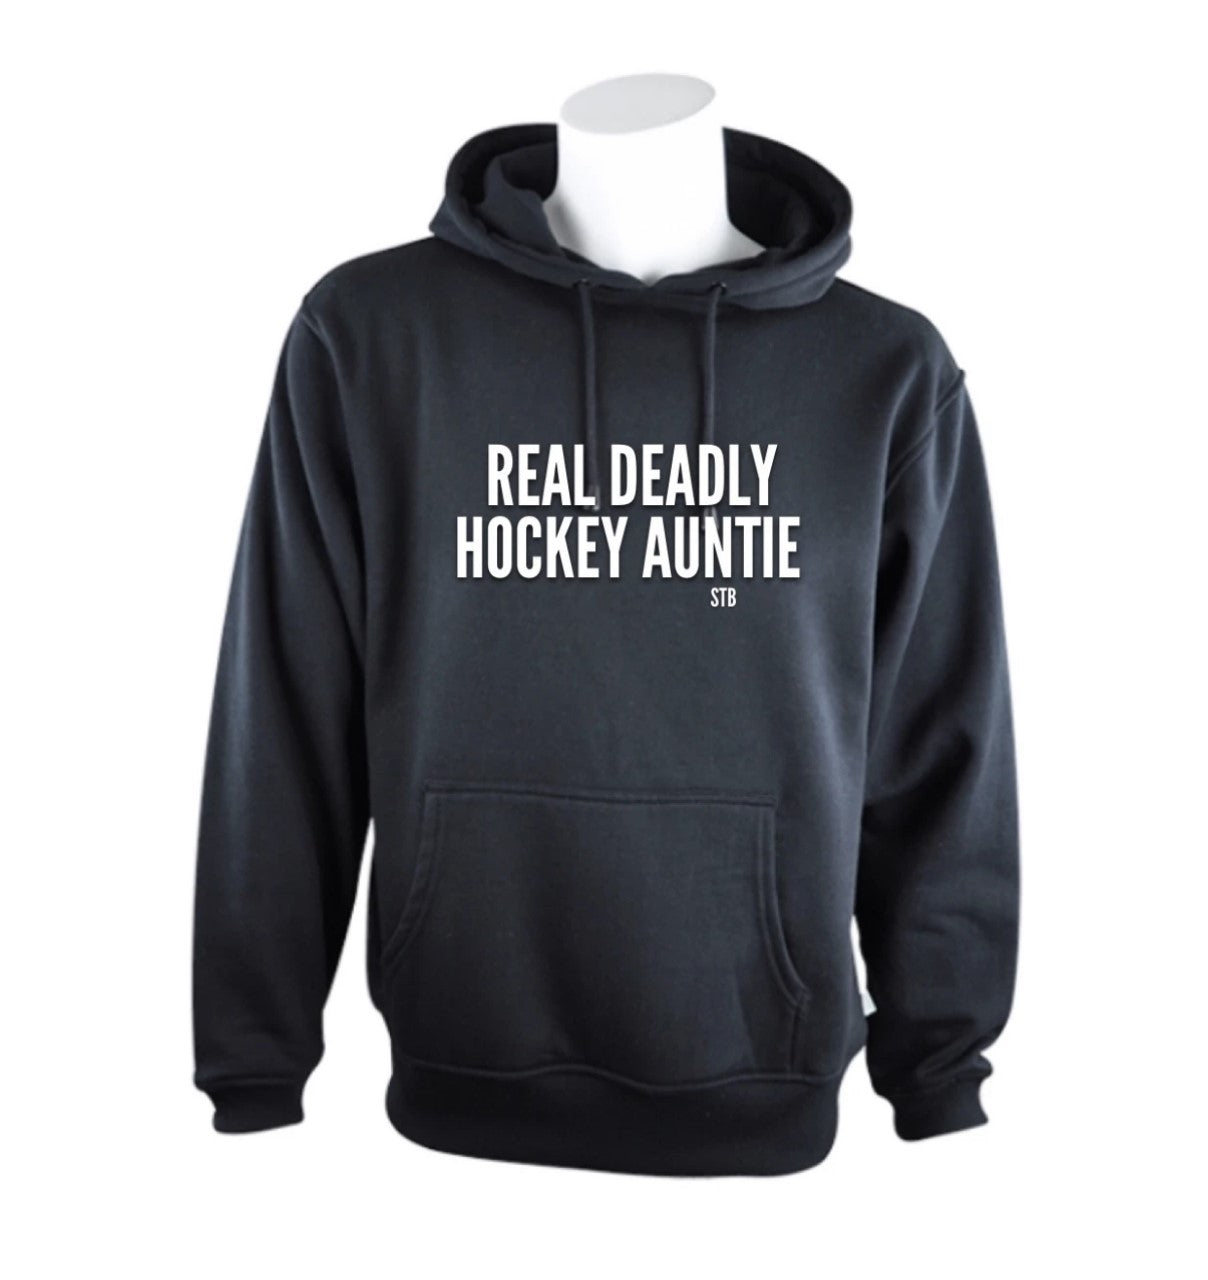 Real Deadly Hockey Auntie Hoodie